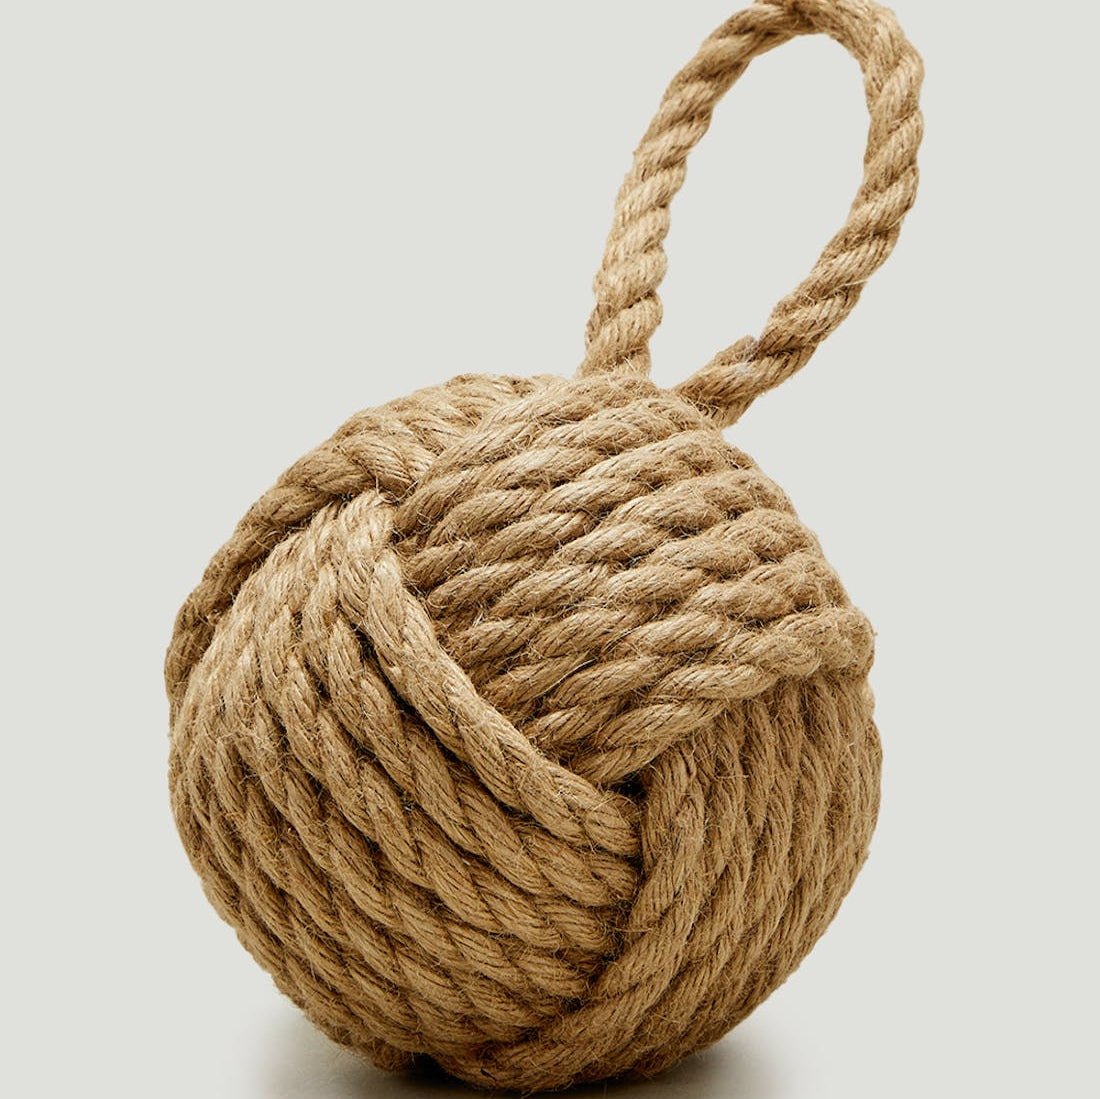 Natural Rope Doorstop - The Mewstone Candle Co